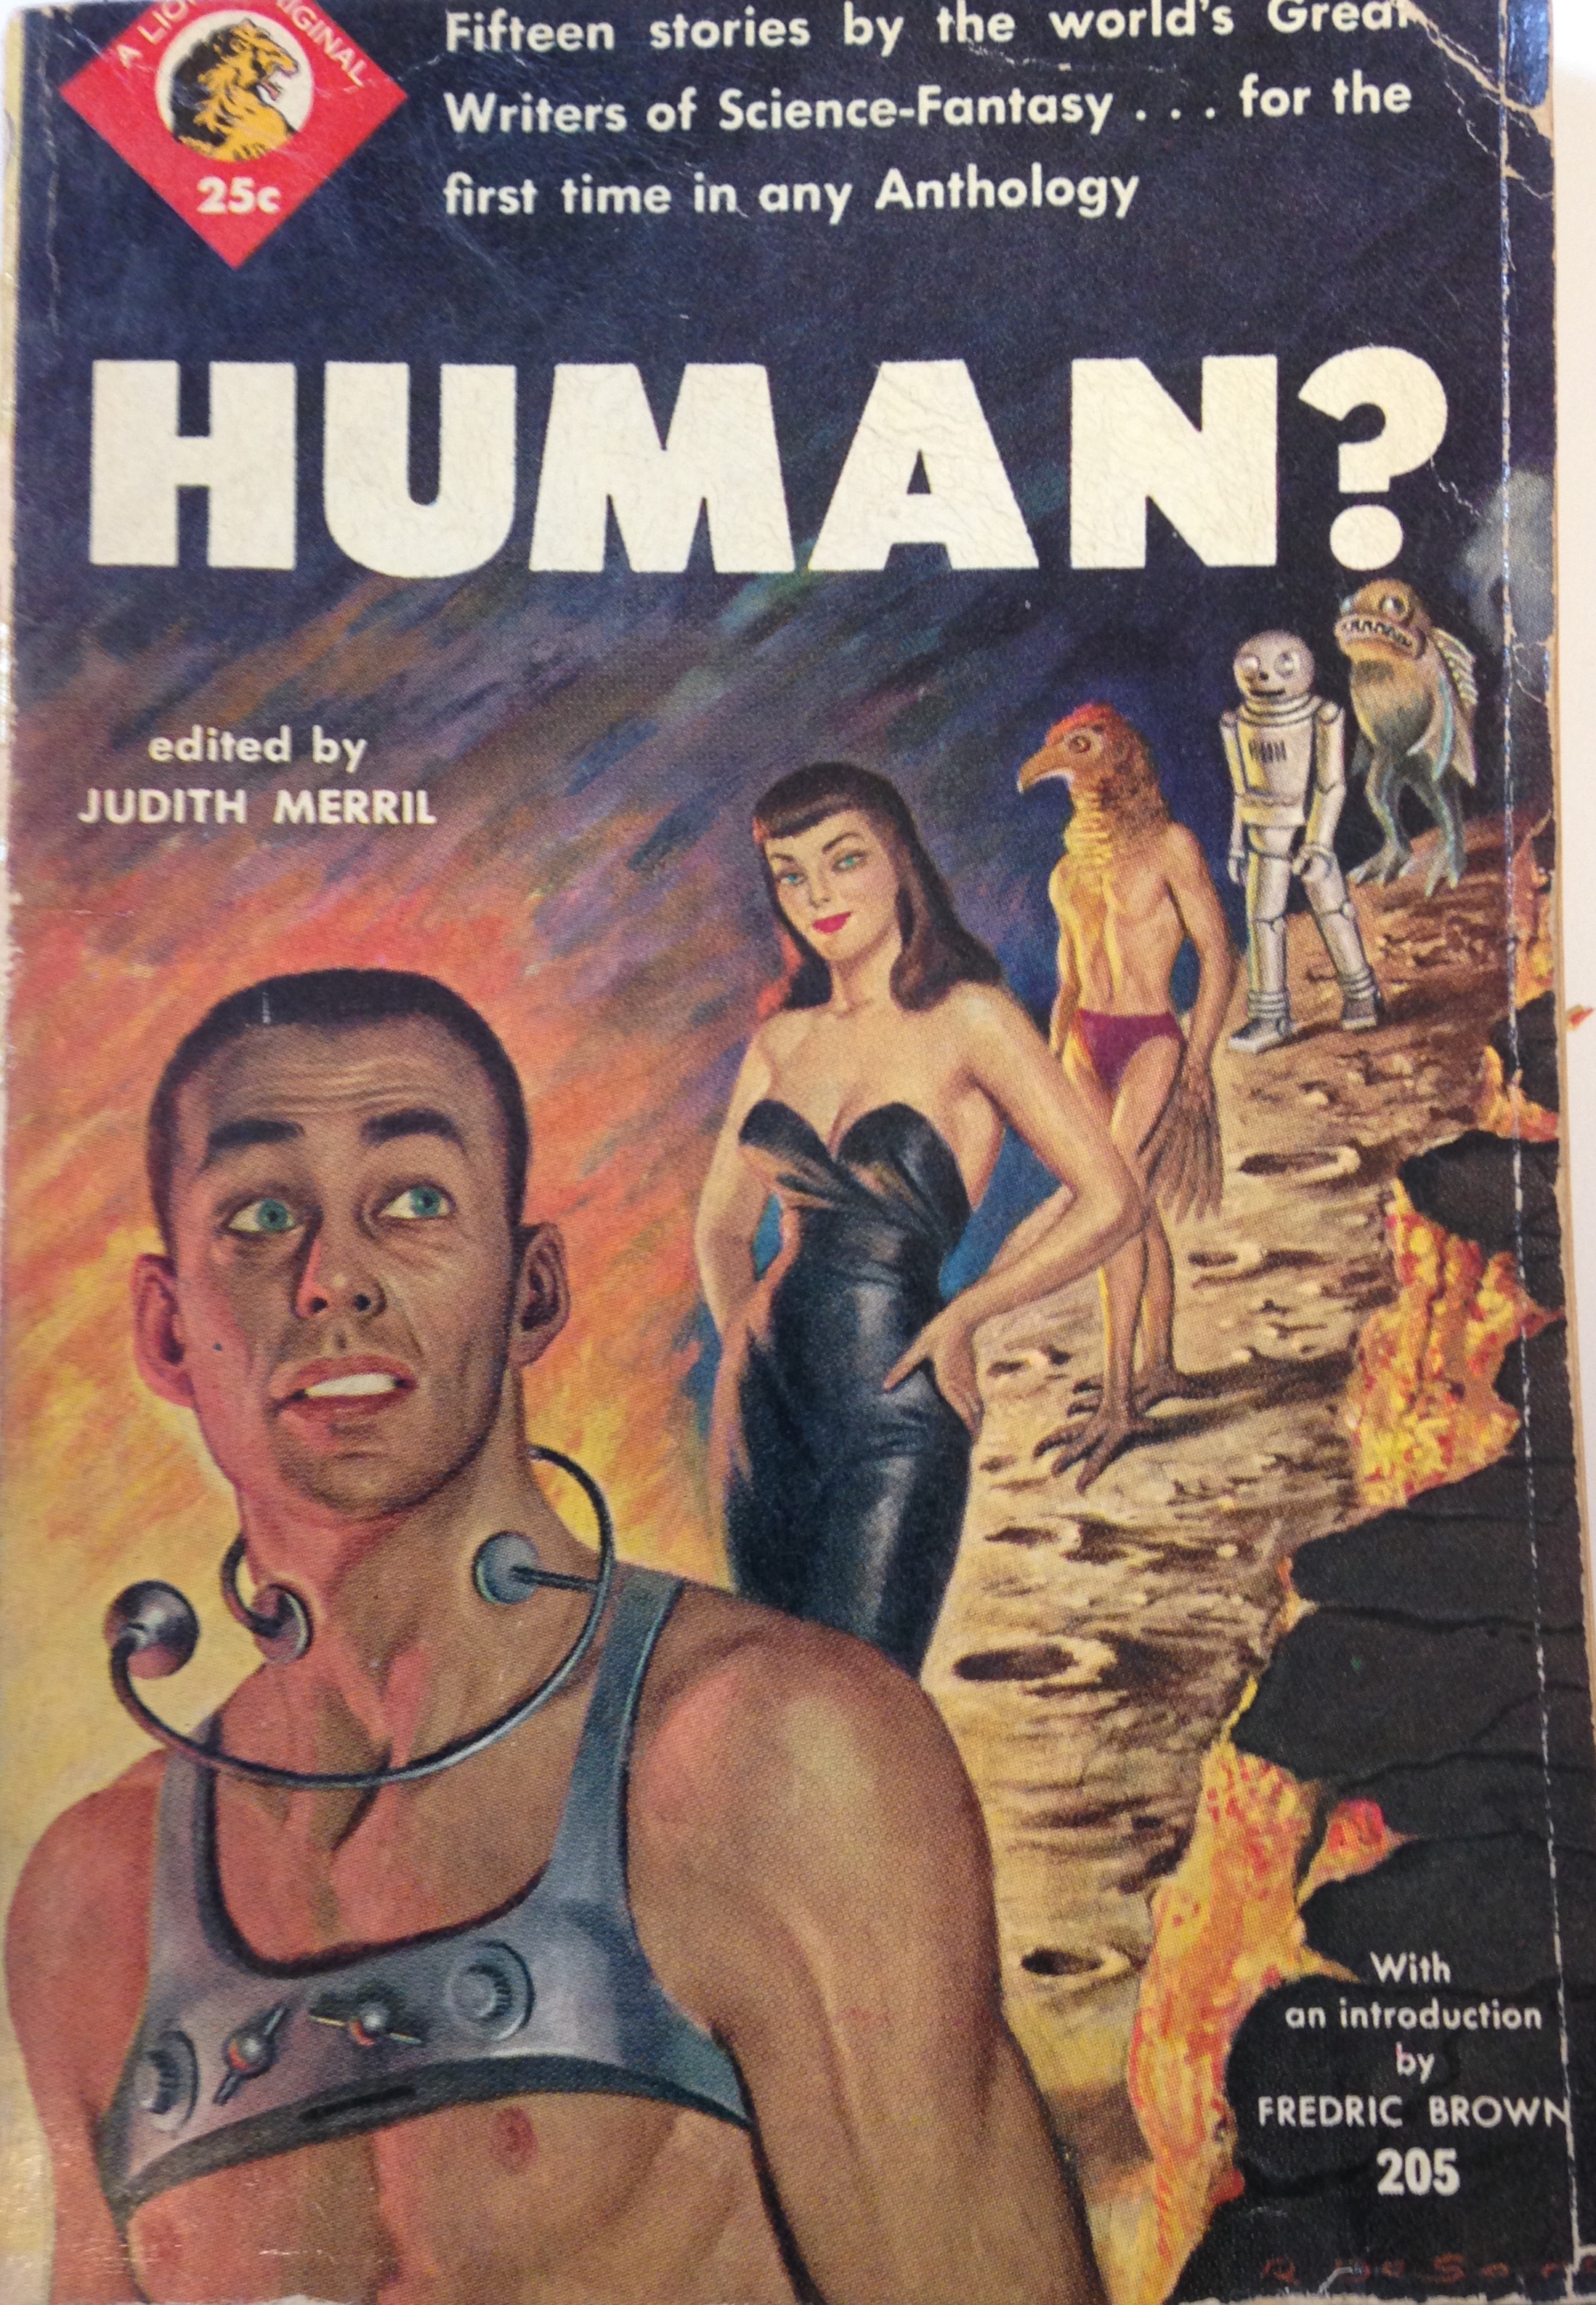 Cover of the book "Human?", where man looks bewildered by a procession of human-like figures